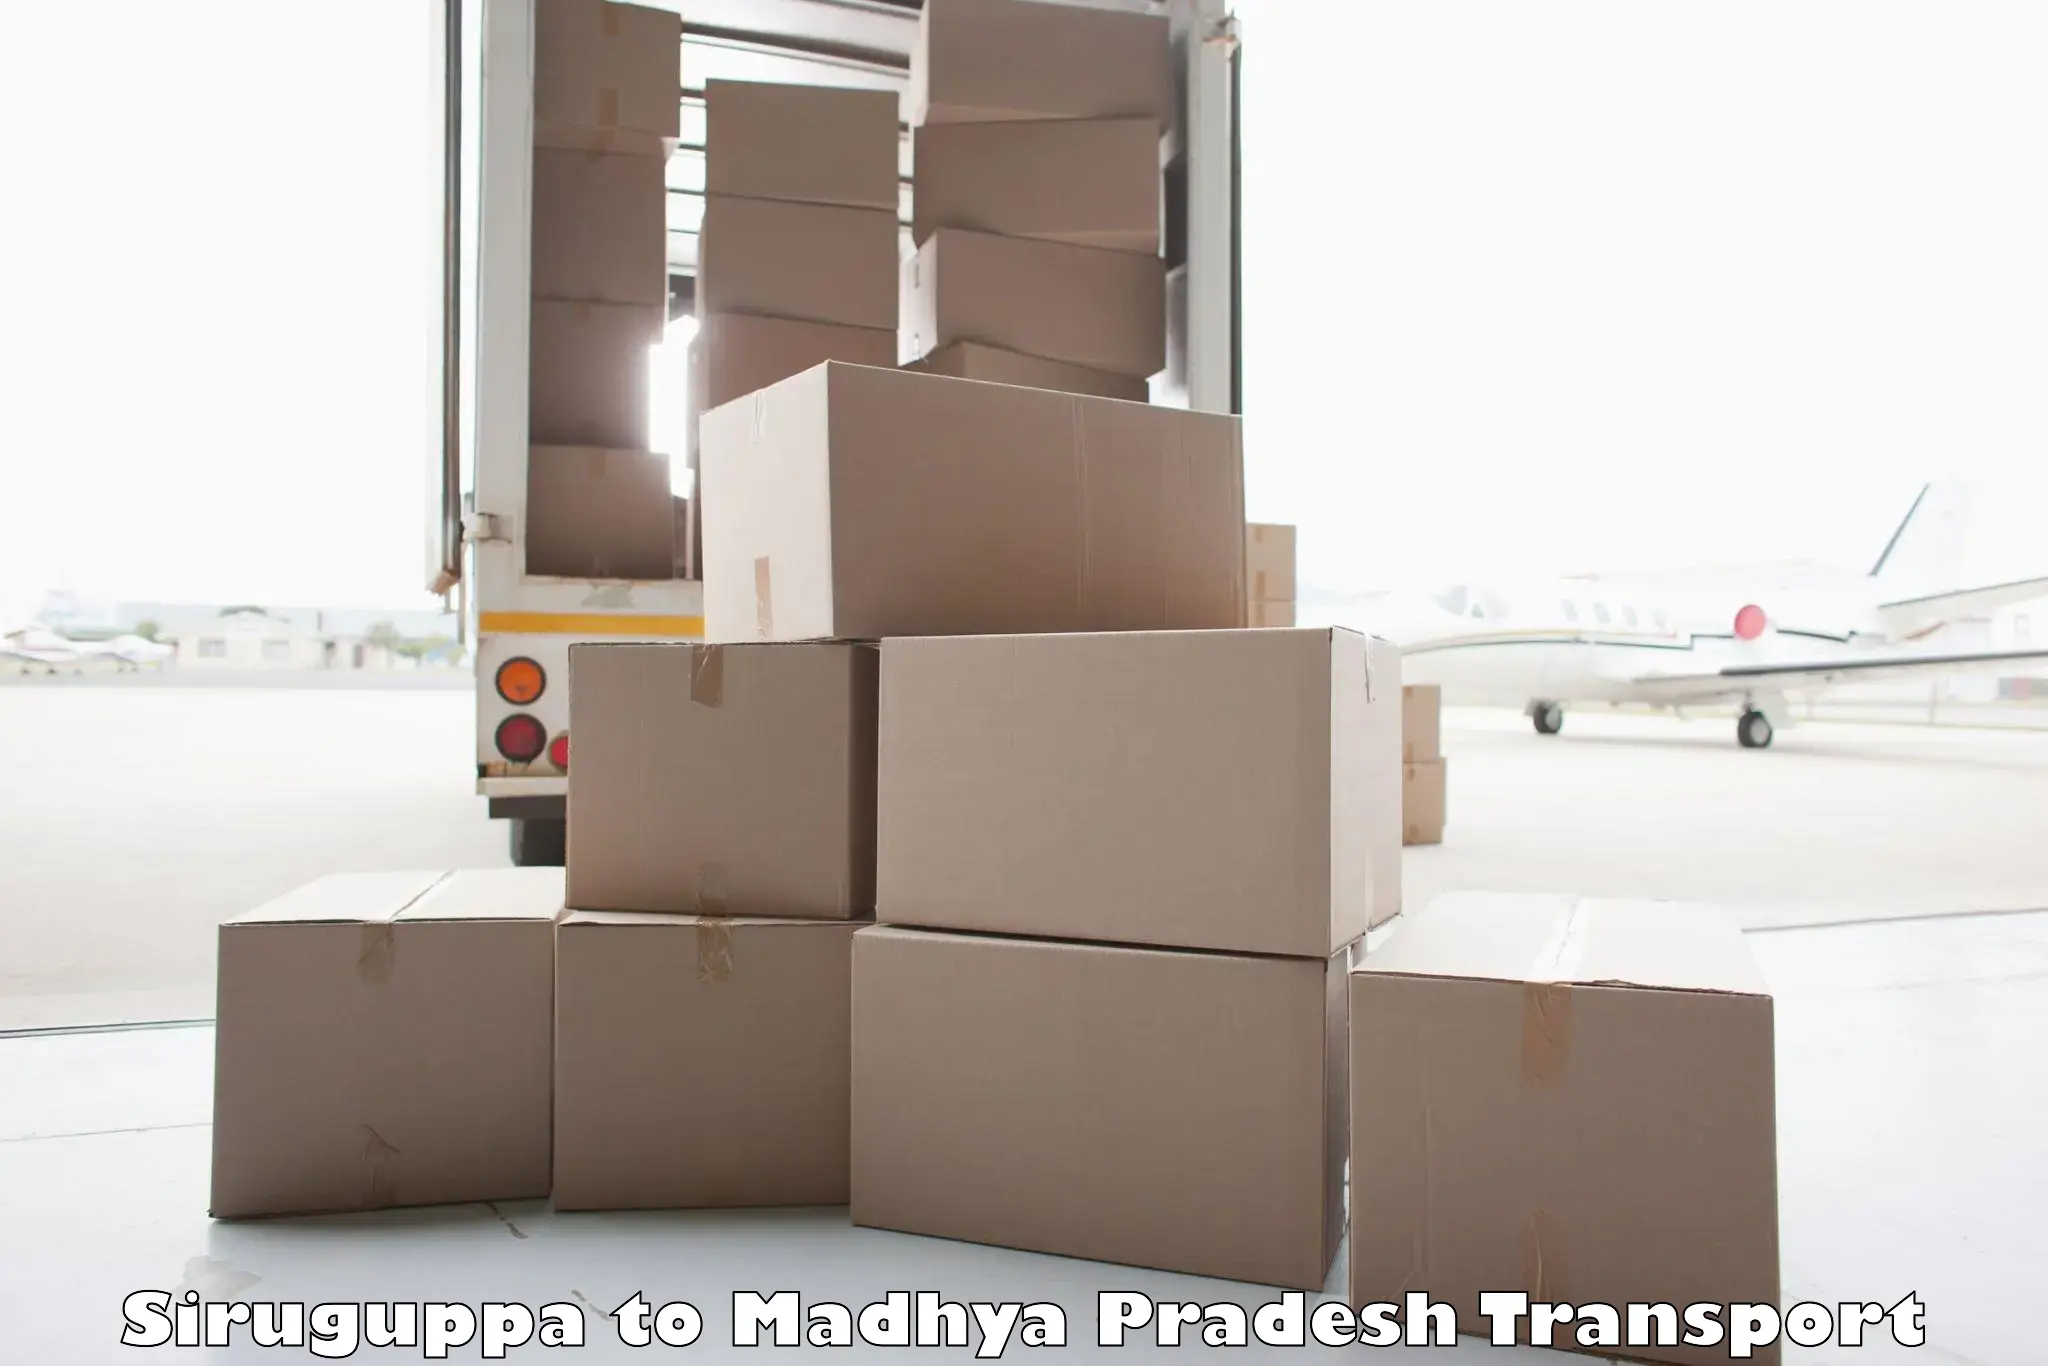 Daily parcel service transport in Siruguppa to Rewa